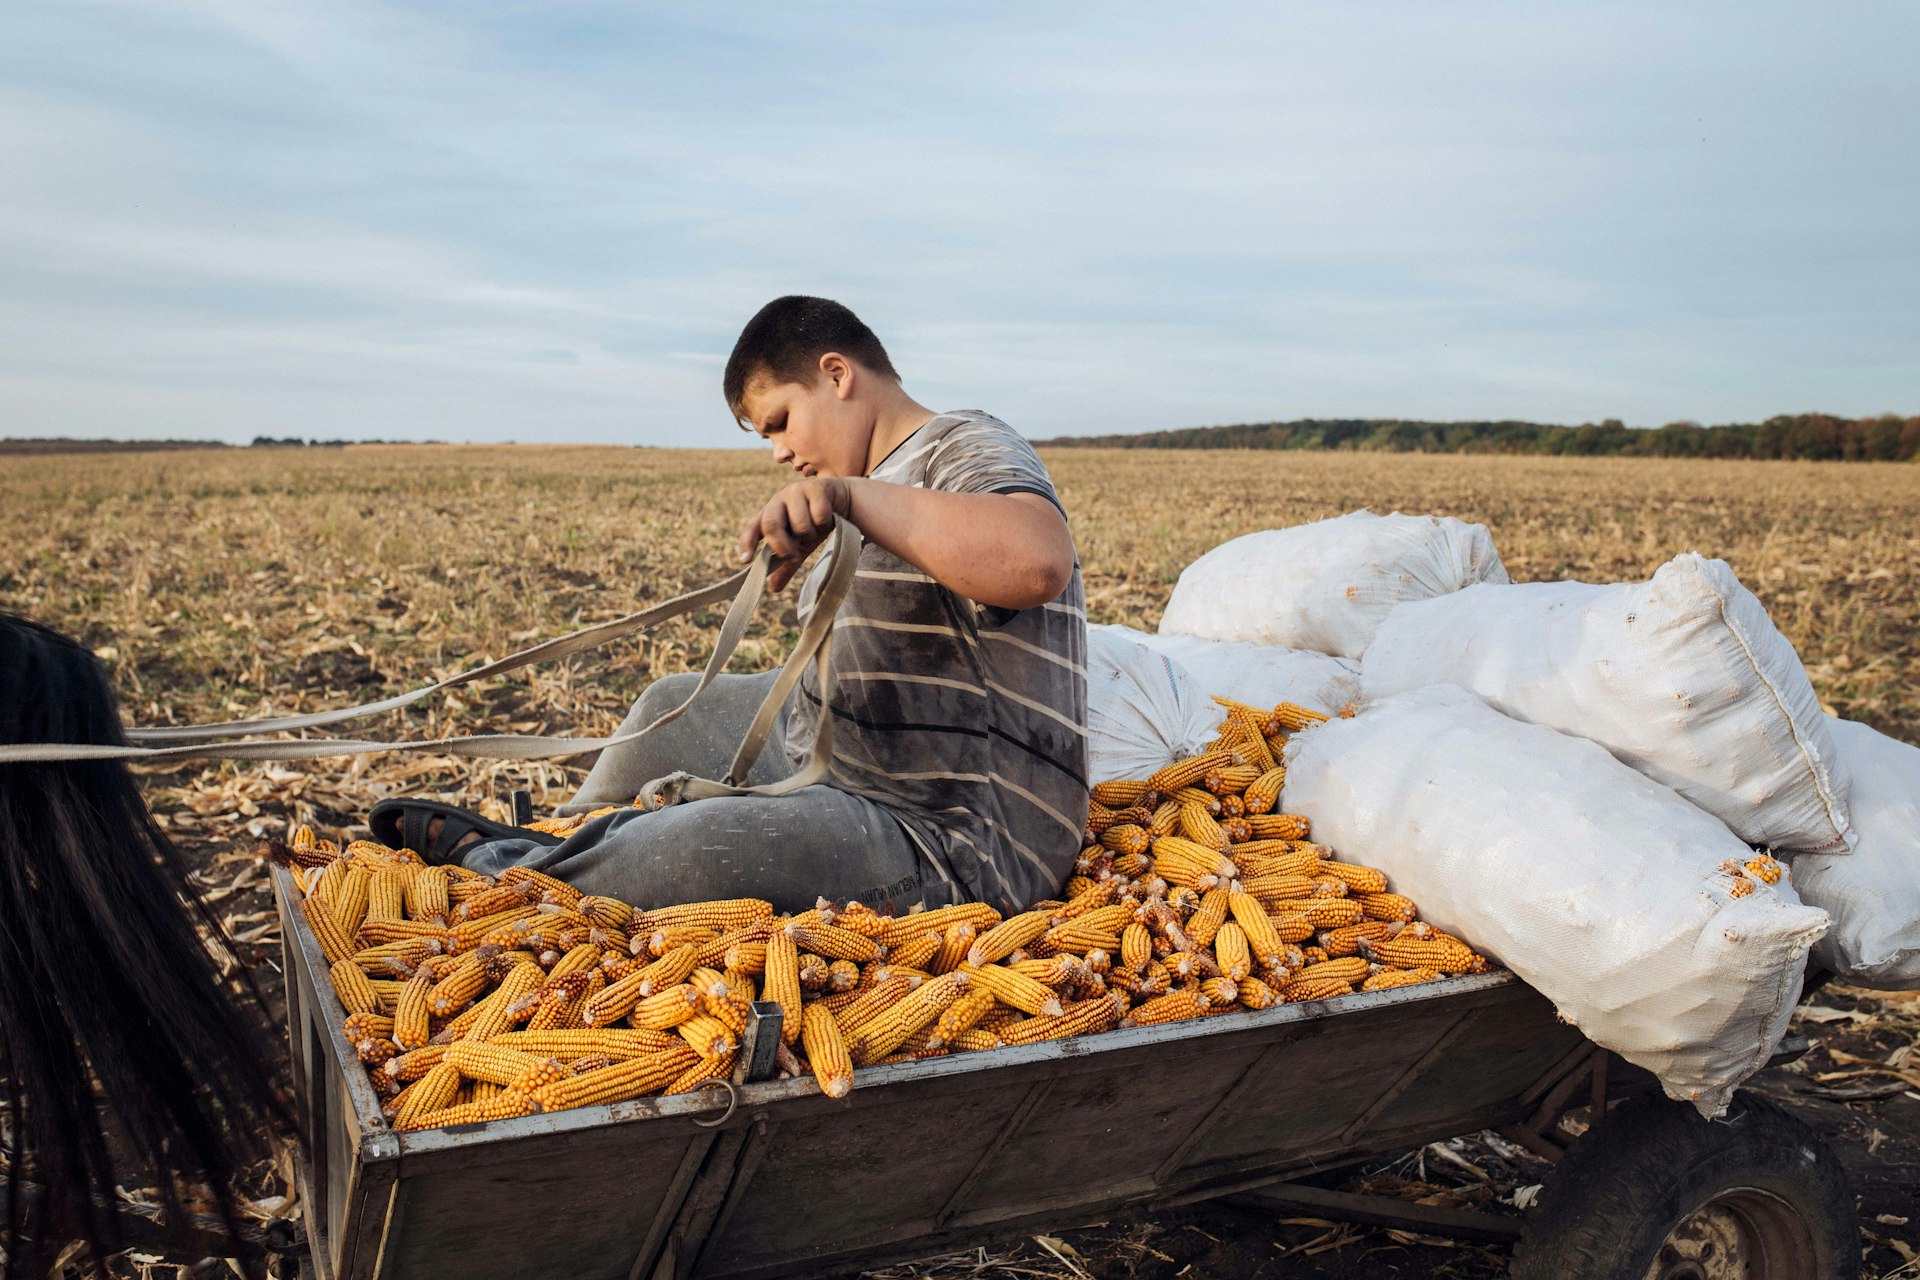 Fourteen-year-old Maxim harvests corn in the autumn sunshine. Despite his age, Maxim is expected to work on his parents' farm every day as well as attending school in a neighbouring village.